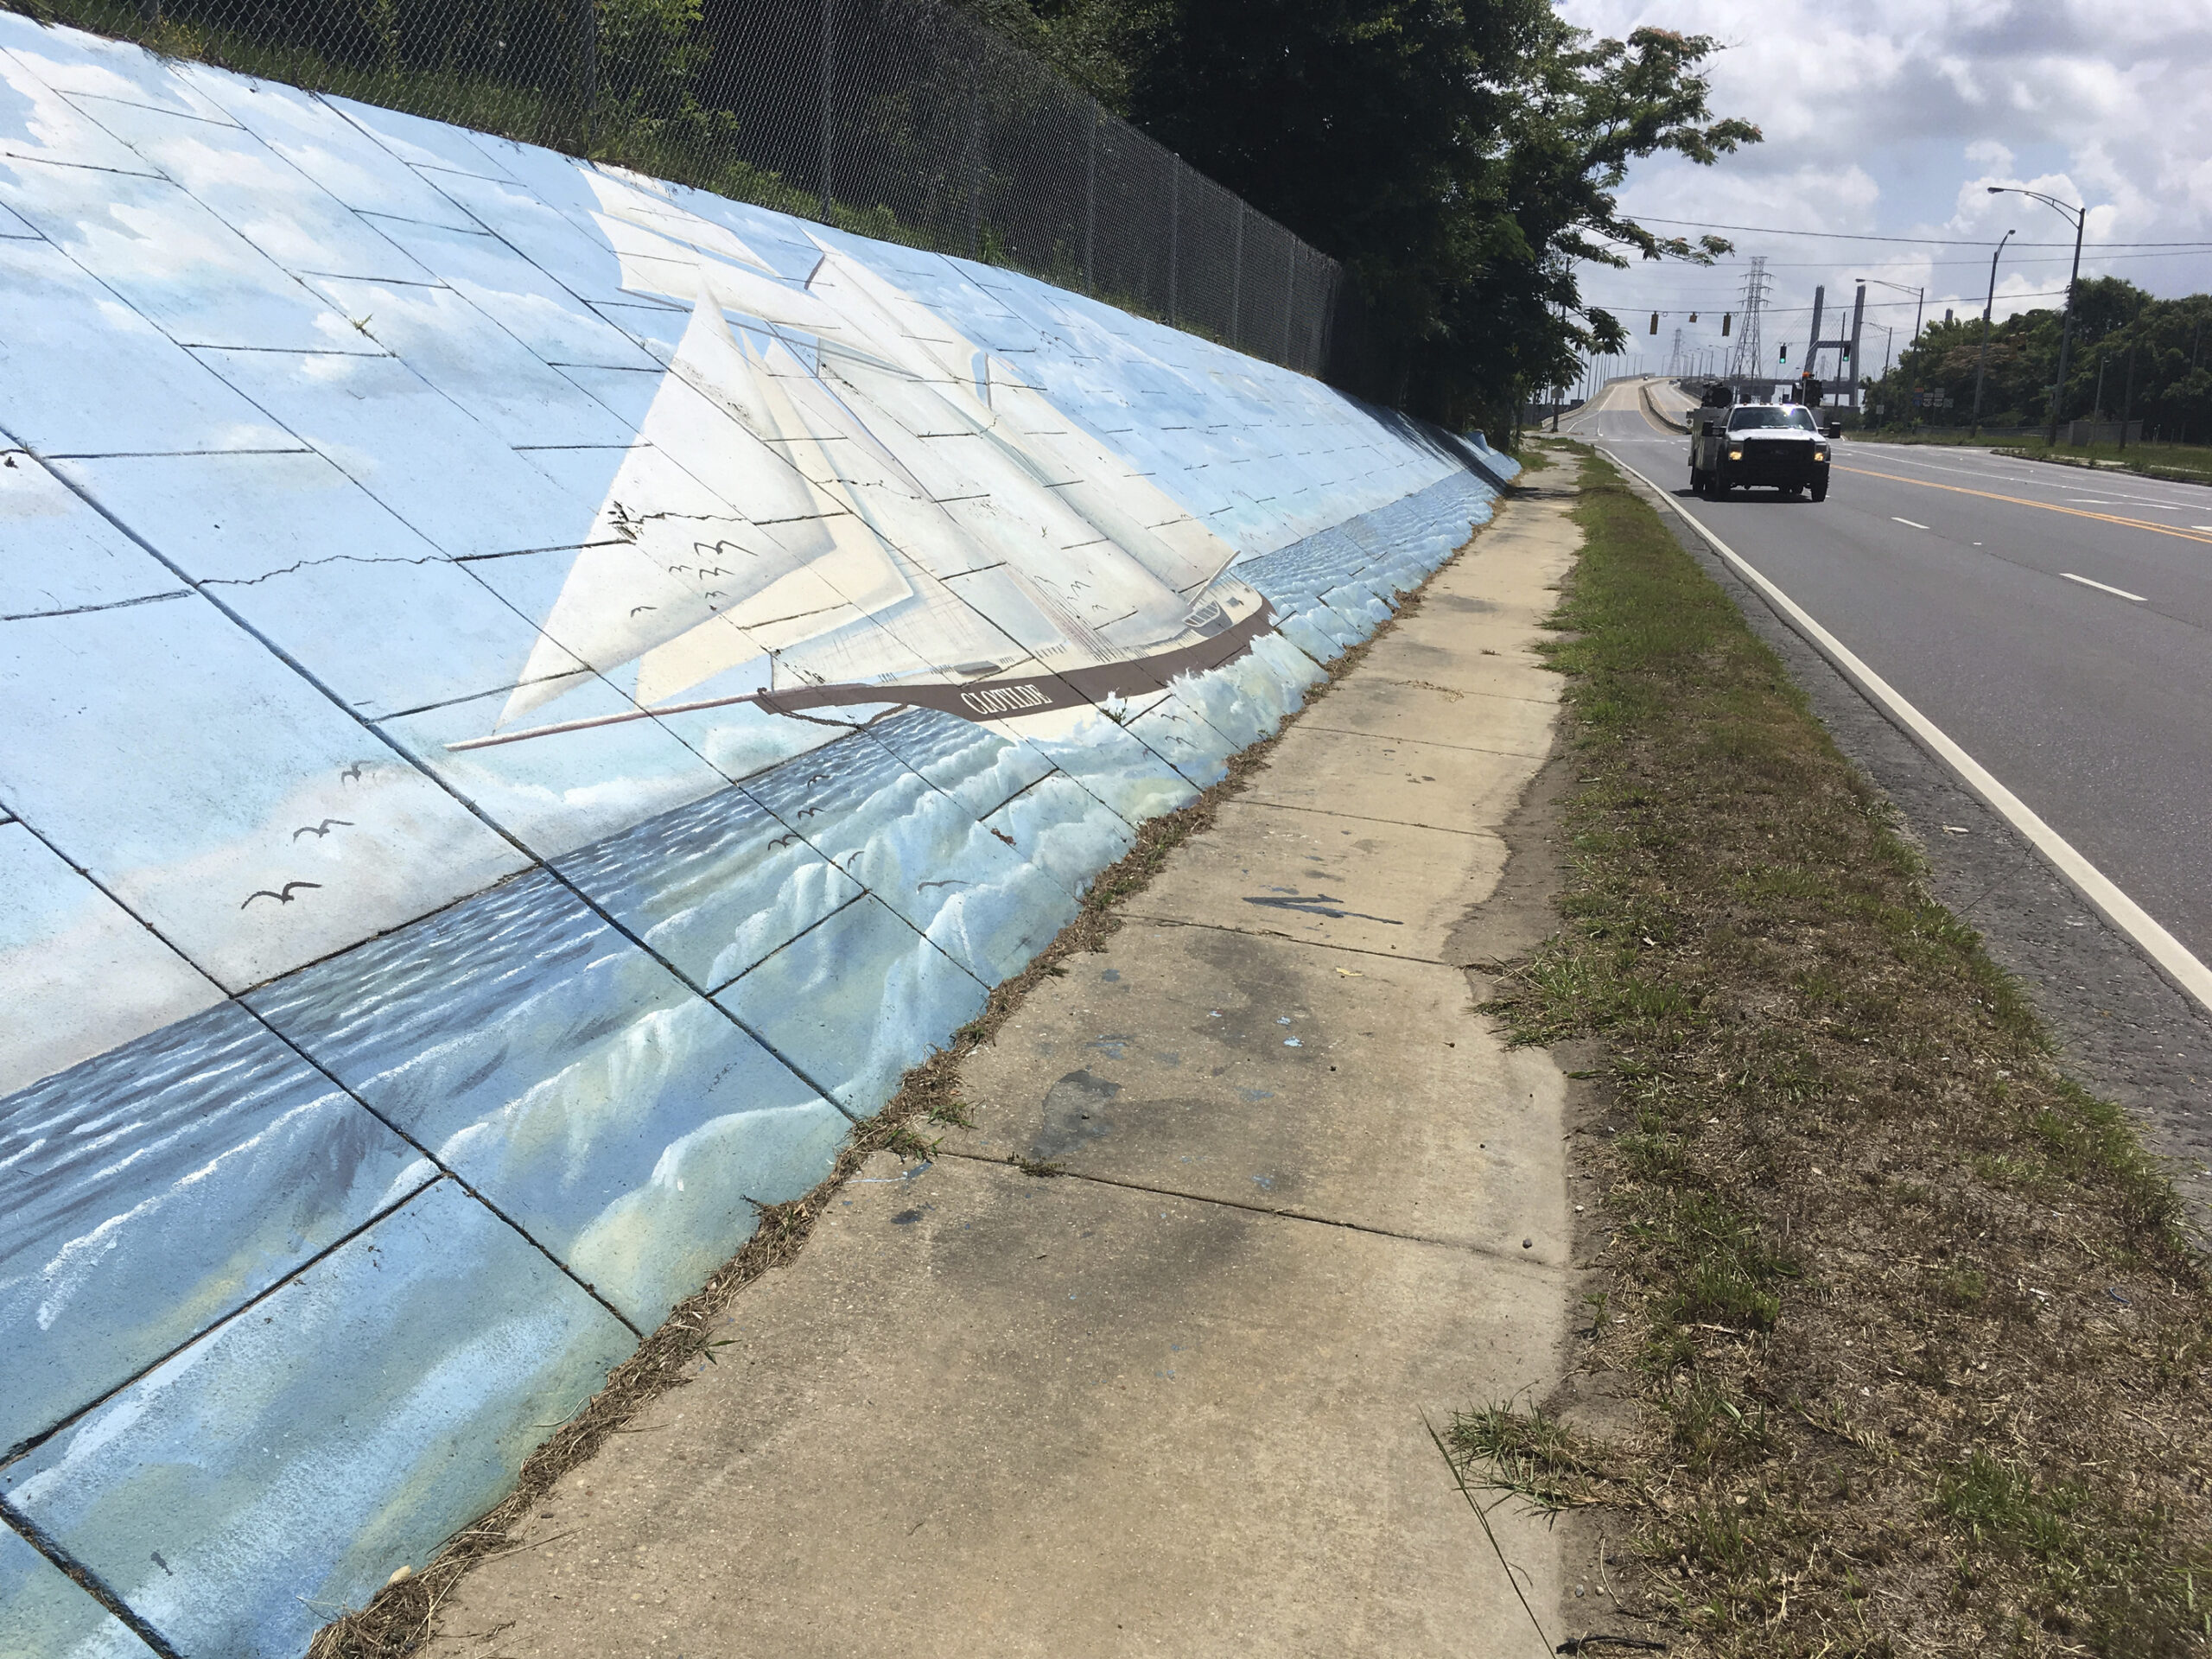 Traffic passes a mural along Africatown Boulevard in Mobile, Alabama, on Thursday, May 30, 2019. Photo credit: Kevin McGill, The Associated Press